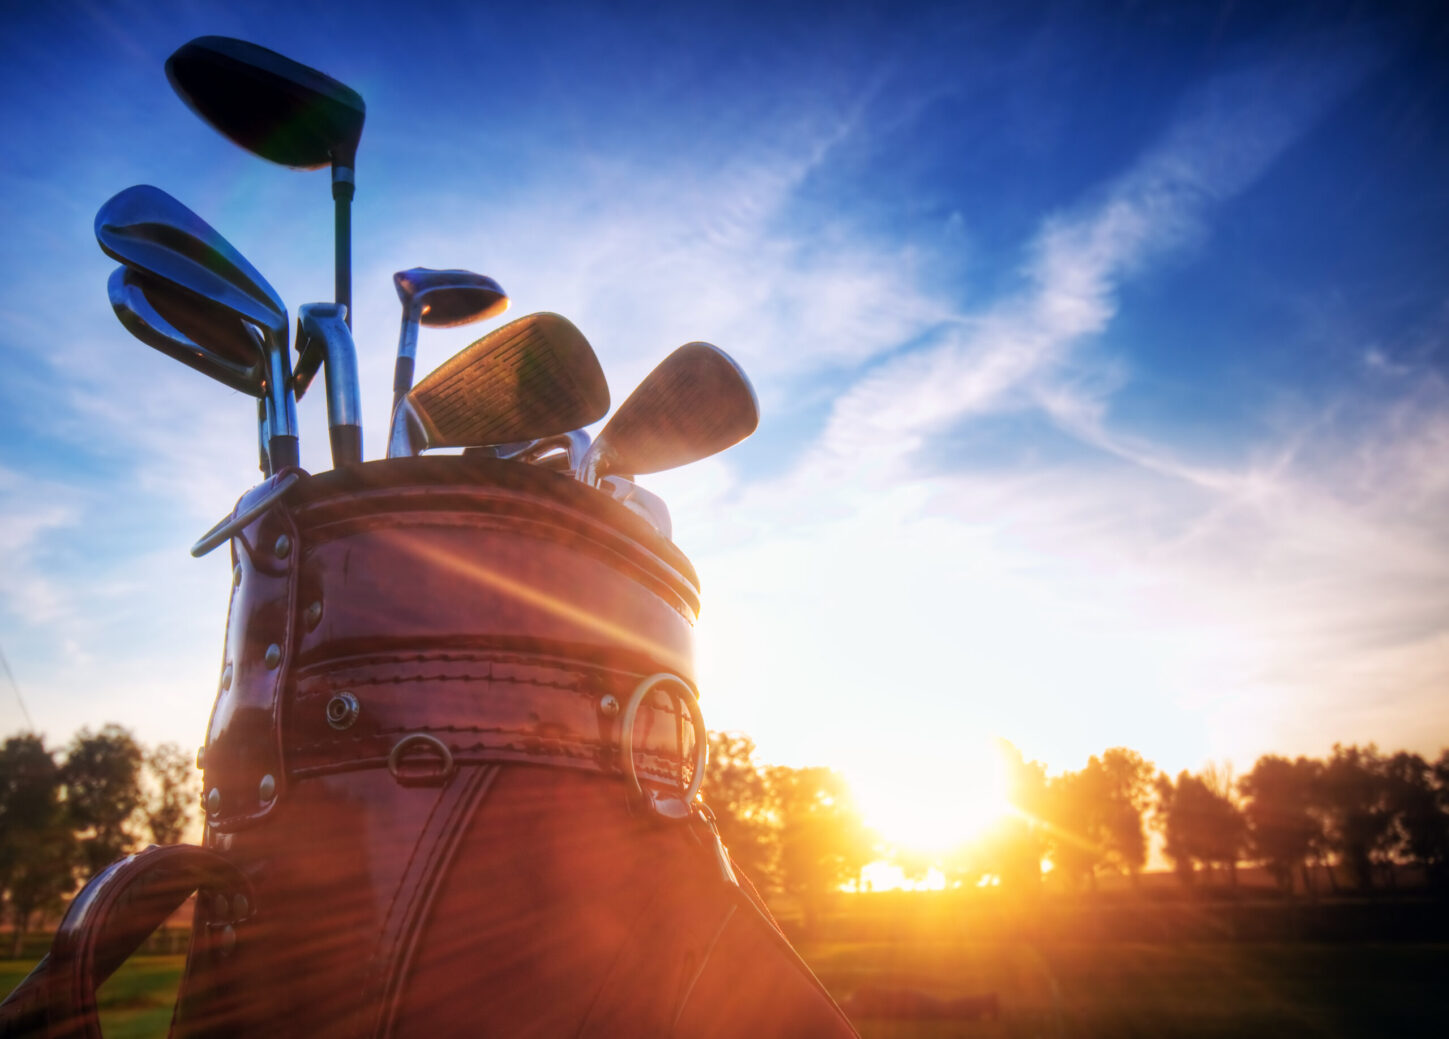 Golf clubs in a golf bag at sunset.